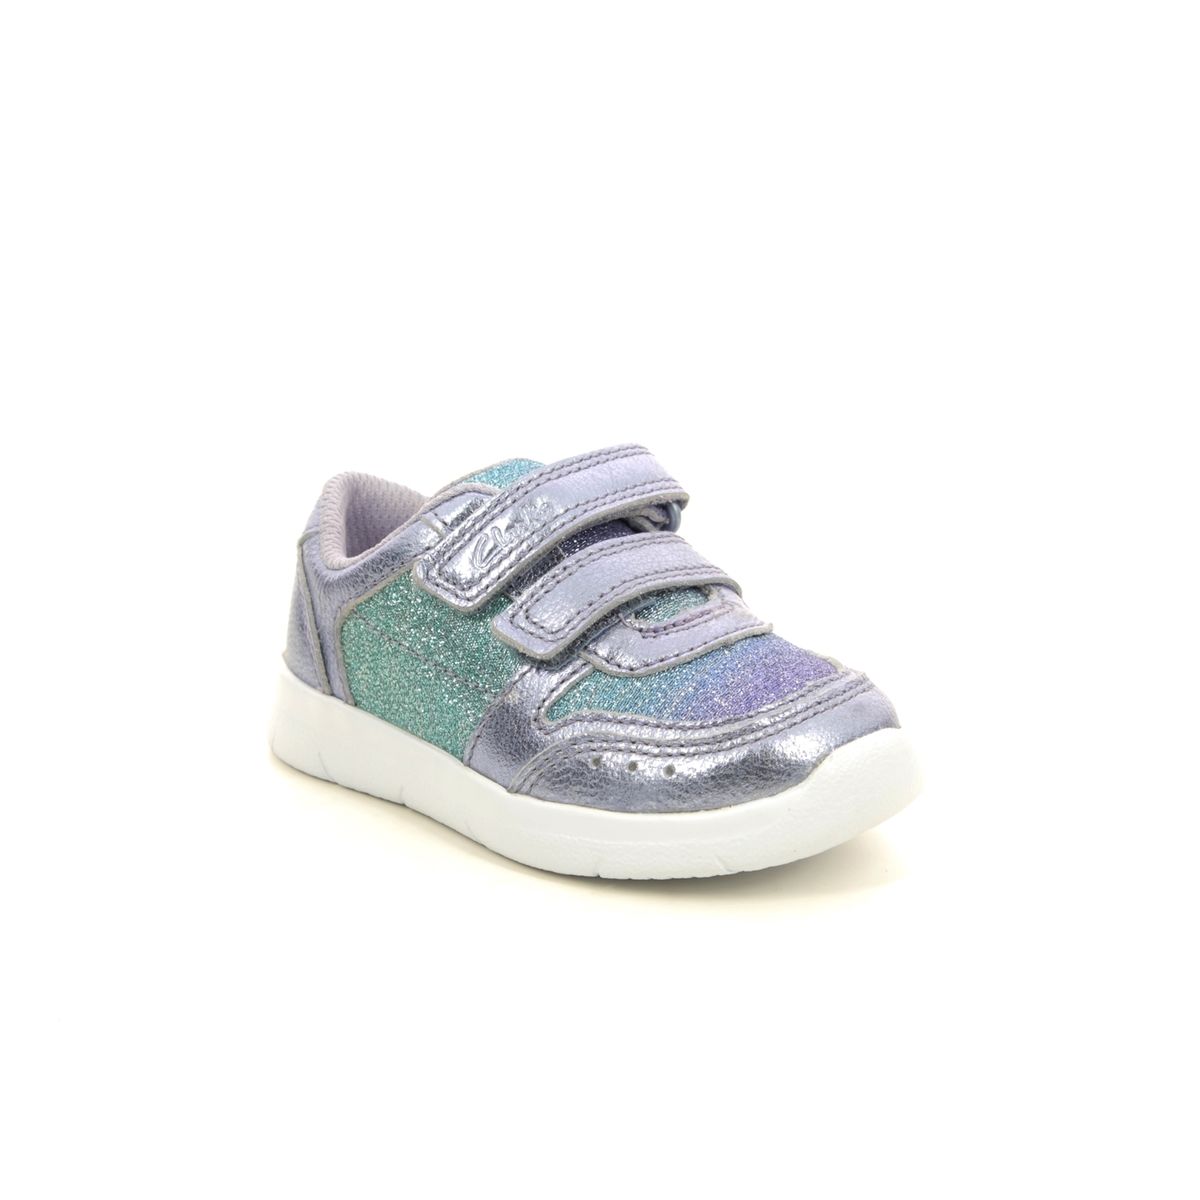 Clarks Ath Sonar T Lilac Kids Toddler Girls Trainers 541217G In Size 6.5 In Plain Lilac G Width Fitting